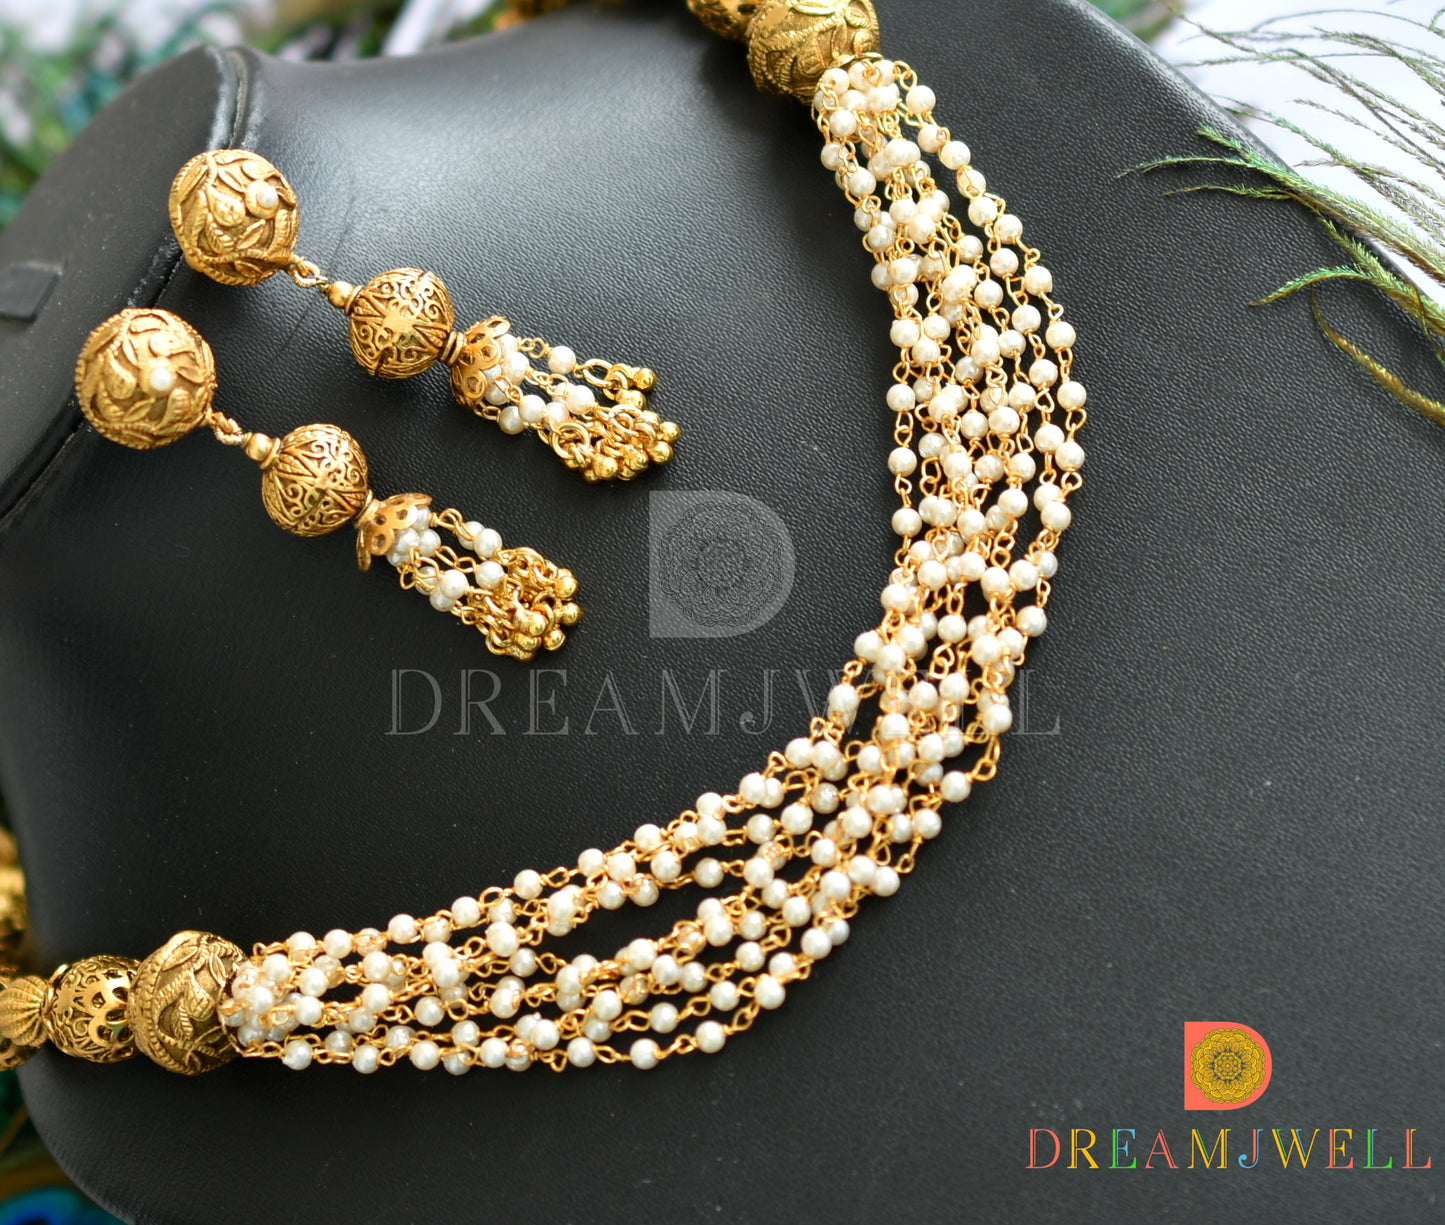 Antique gold tone beaded pearl necklace set dj-11079